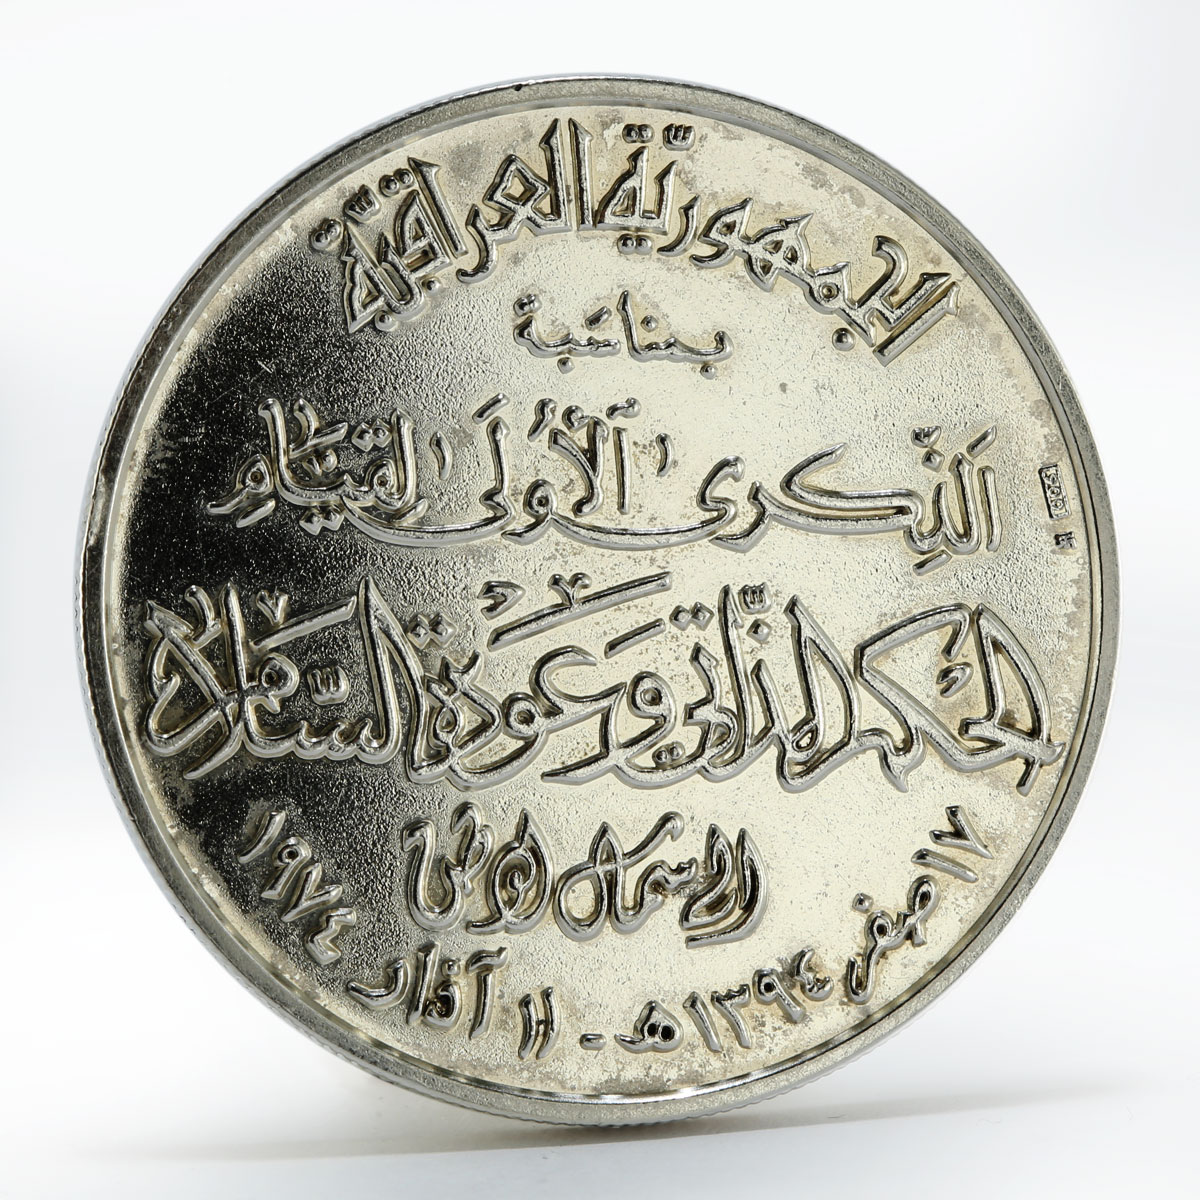 Iraq 1st Anniversary for Peace and Civil Role Kurdistan medal 1975